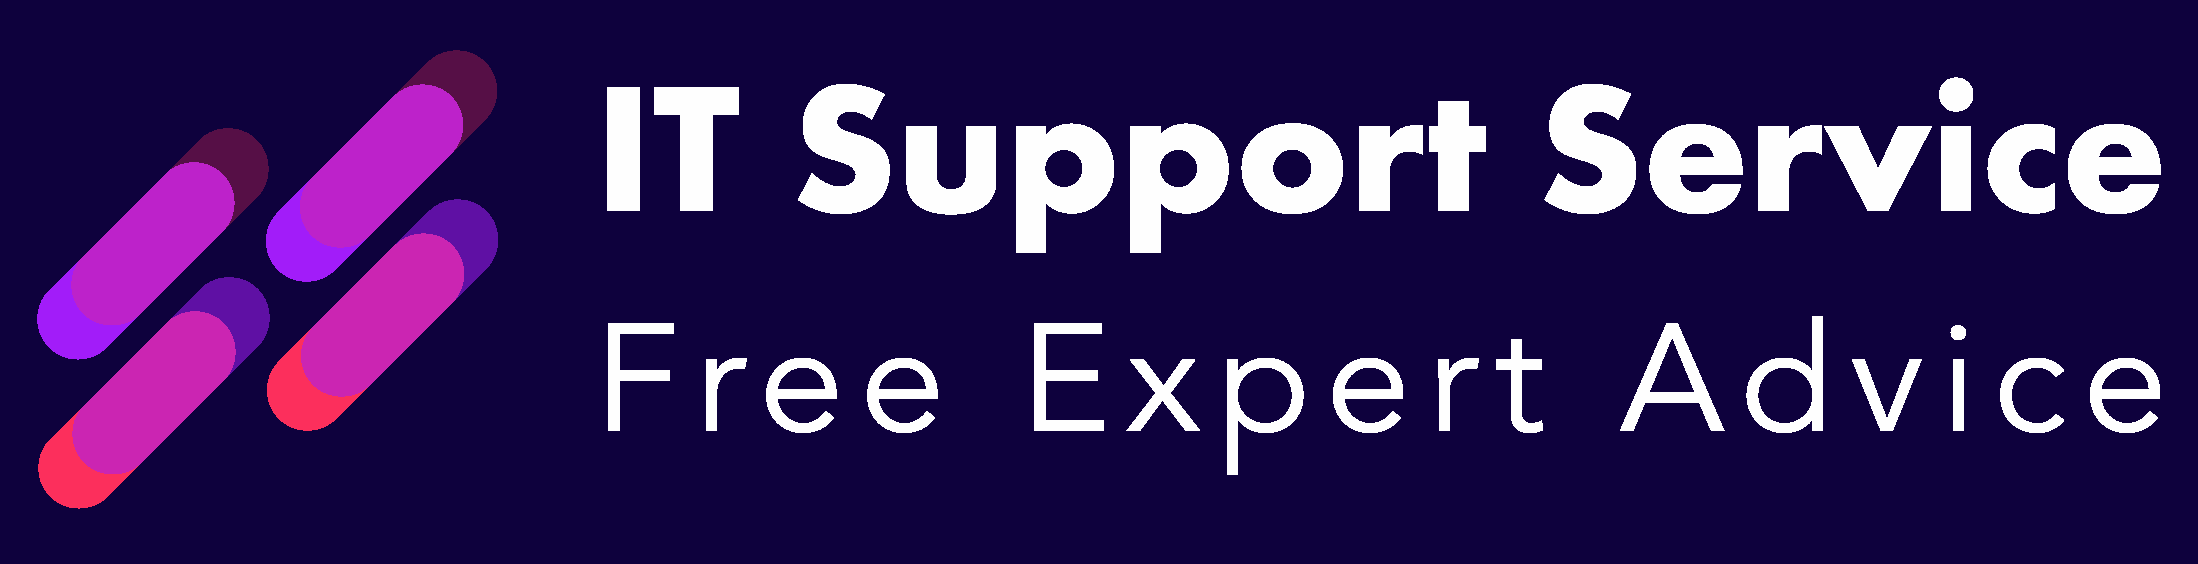 IT Support Service – Free Expert Advice